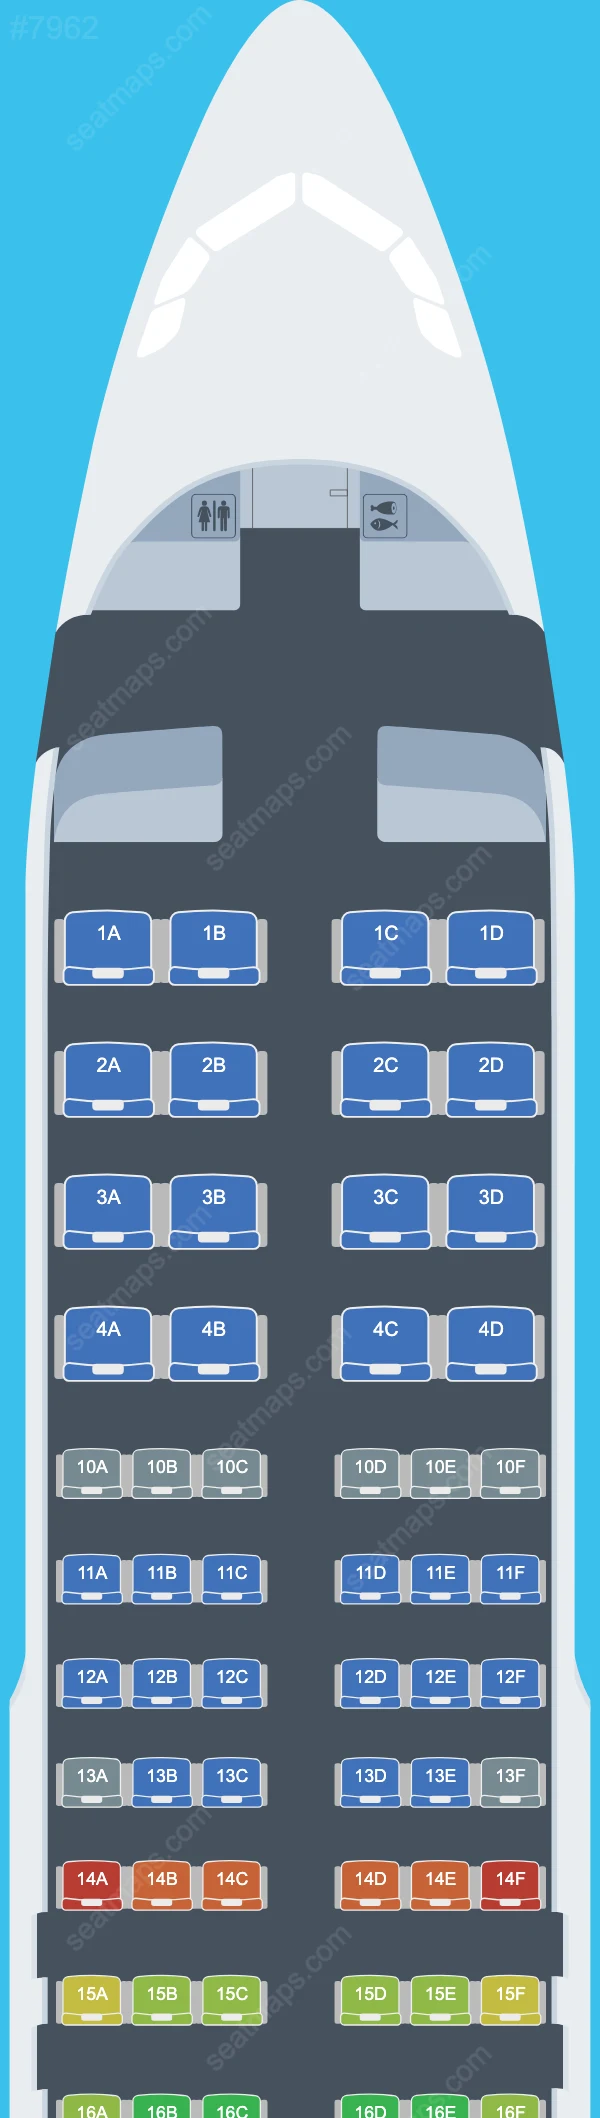 Delta Airbus A320 Seat Maps A320-200